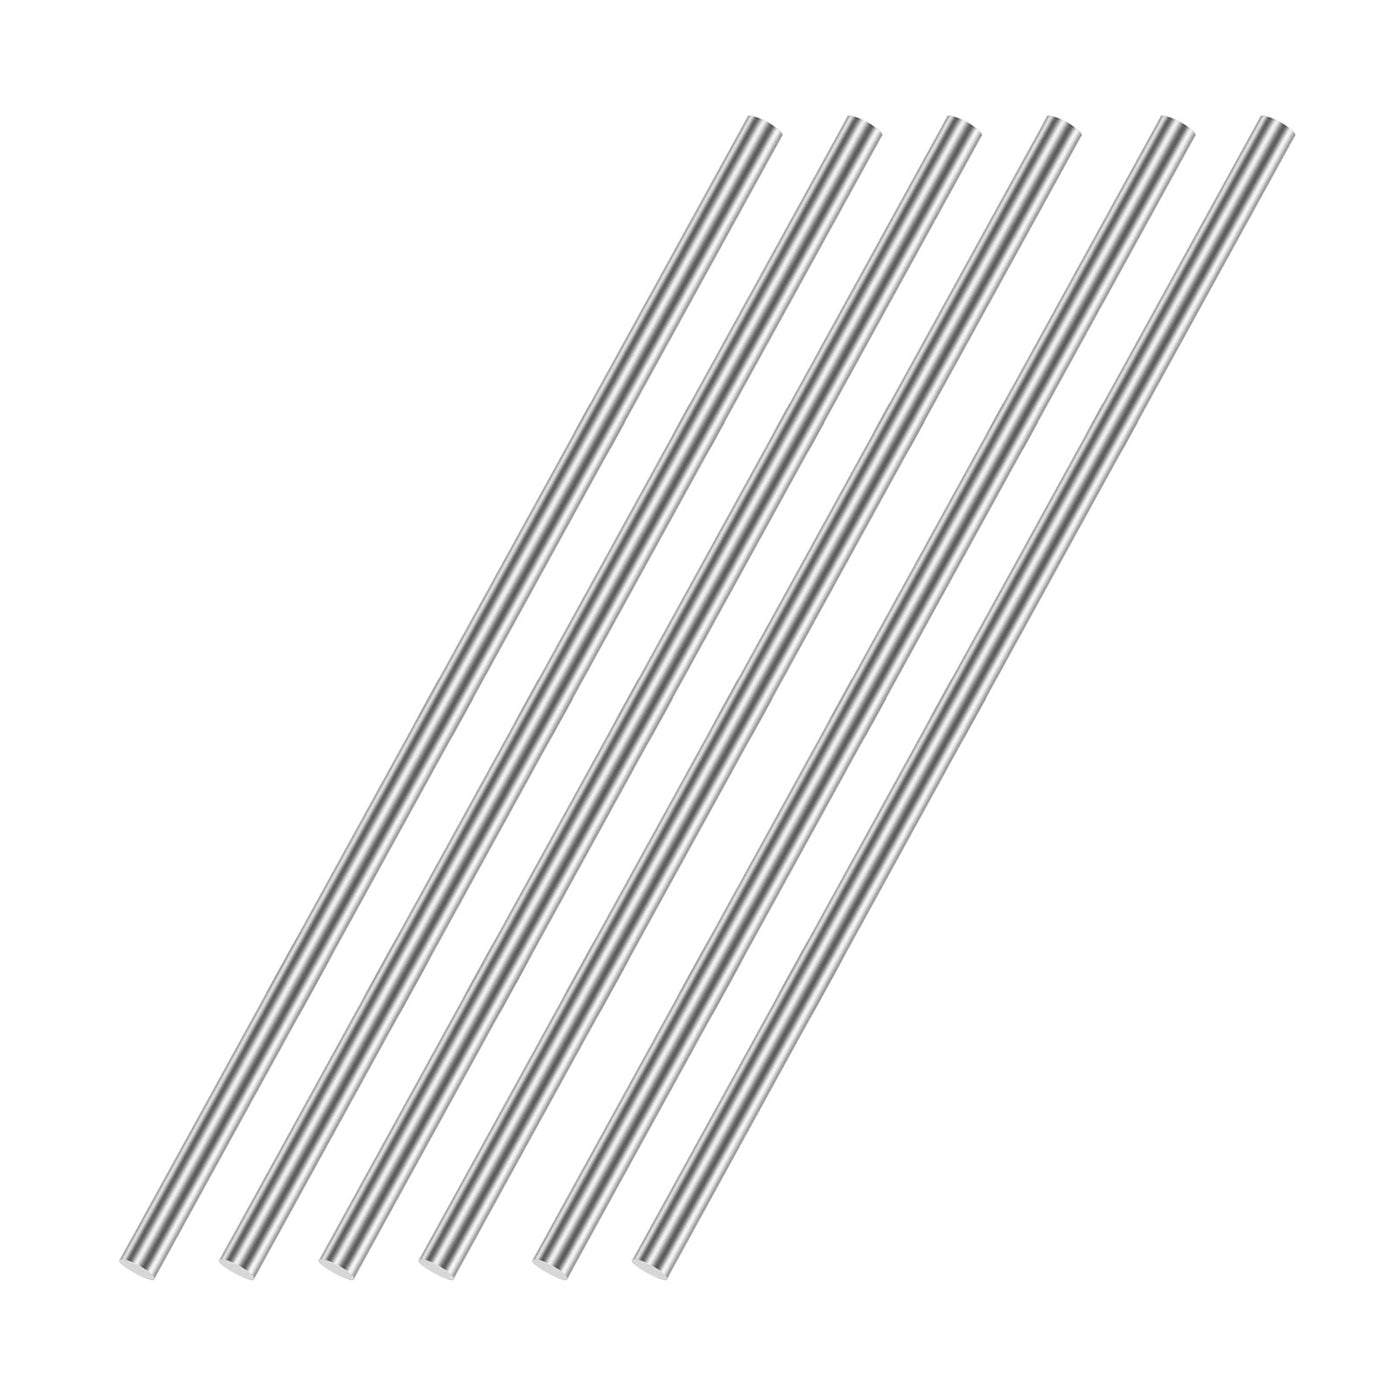 uxcell Uxcell 3mm x 350mm(1/8" x 14") 304 Stainless Steel Solid Round Rod for DIY Craft - 6pcs